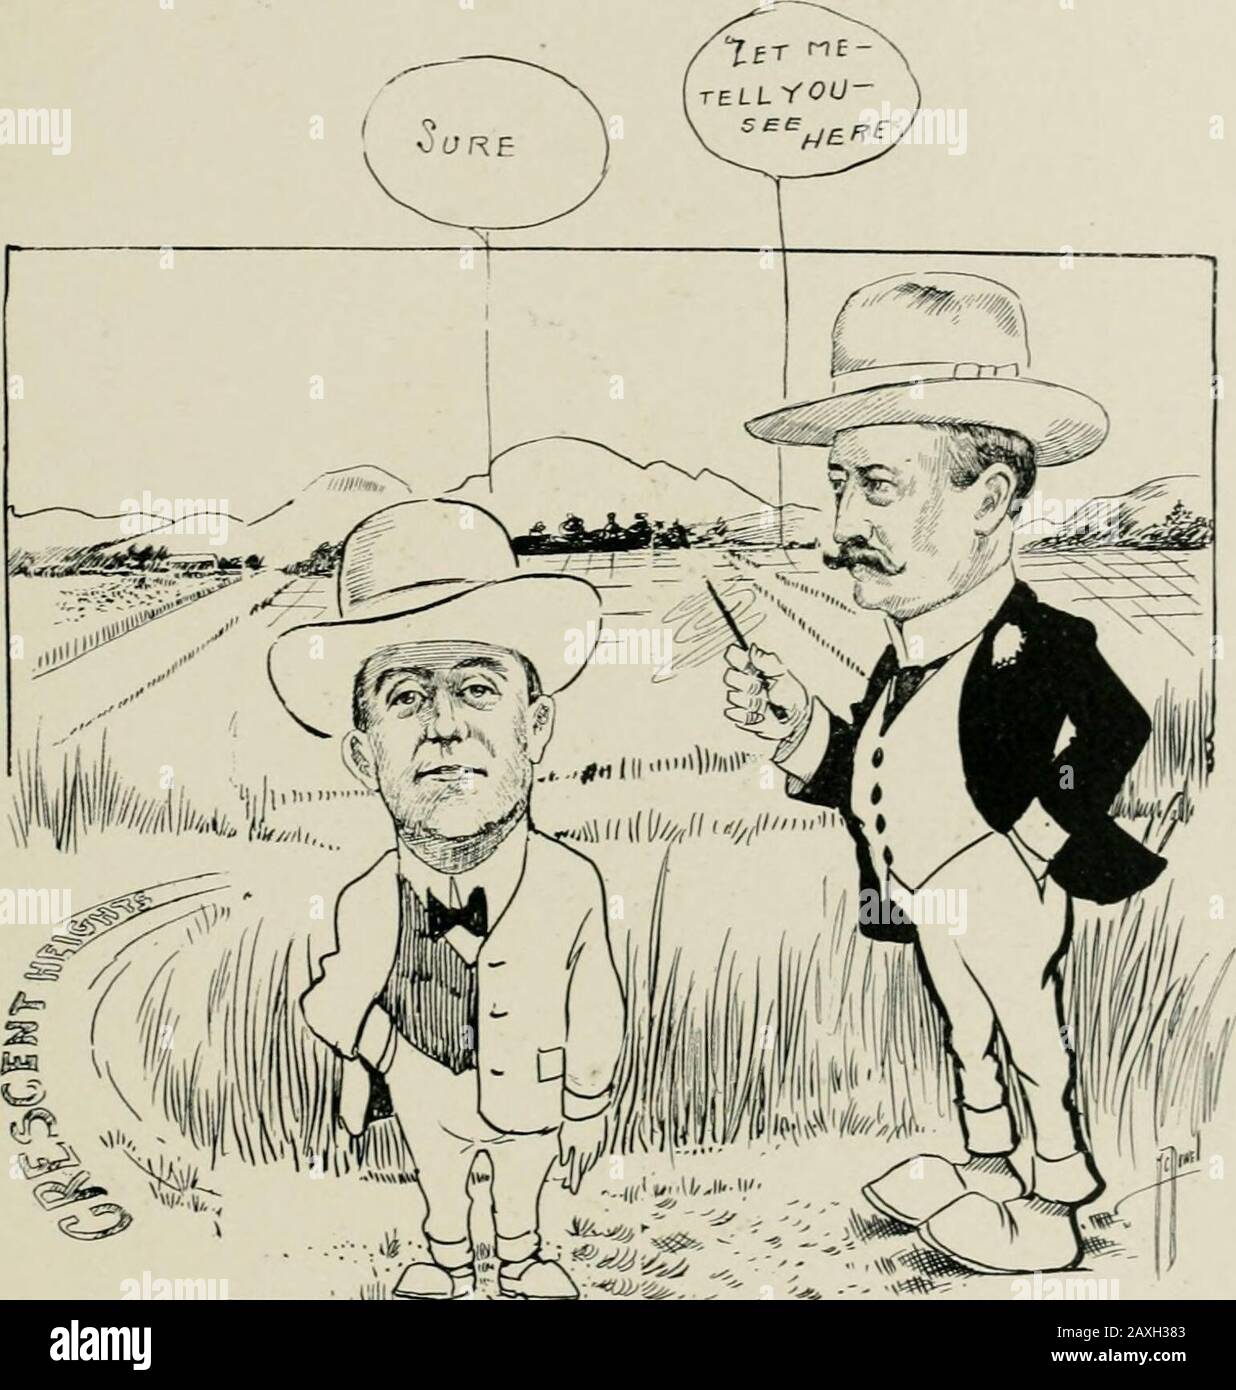 'As we see 'em,' a volume of cartoons and caricatures of Los Angeles citizens . EUGENE GERMAIN,President Germain Seed Co.. , v..&gt;c .^-&lt;^o. (iW^ V* •-v- NORTON & HAY.Real Estate. Stock Photo